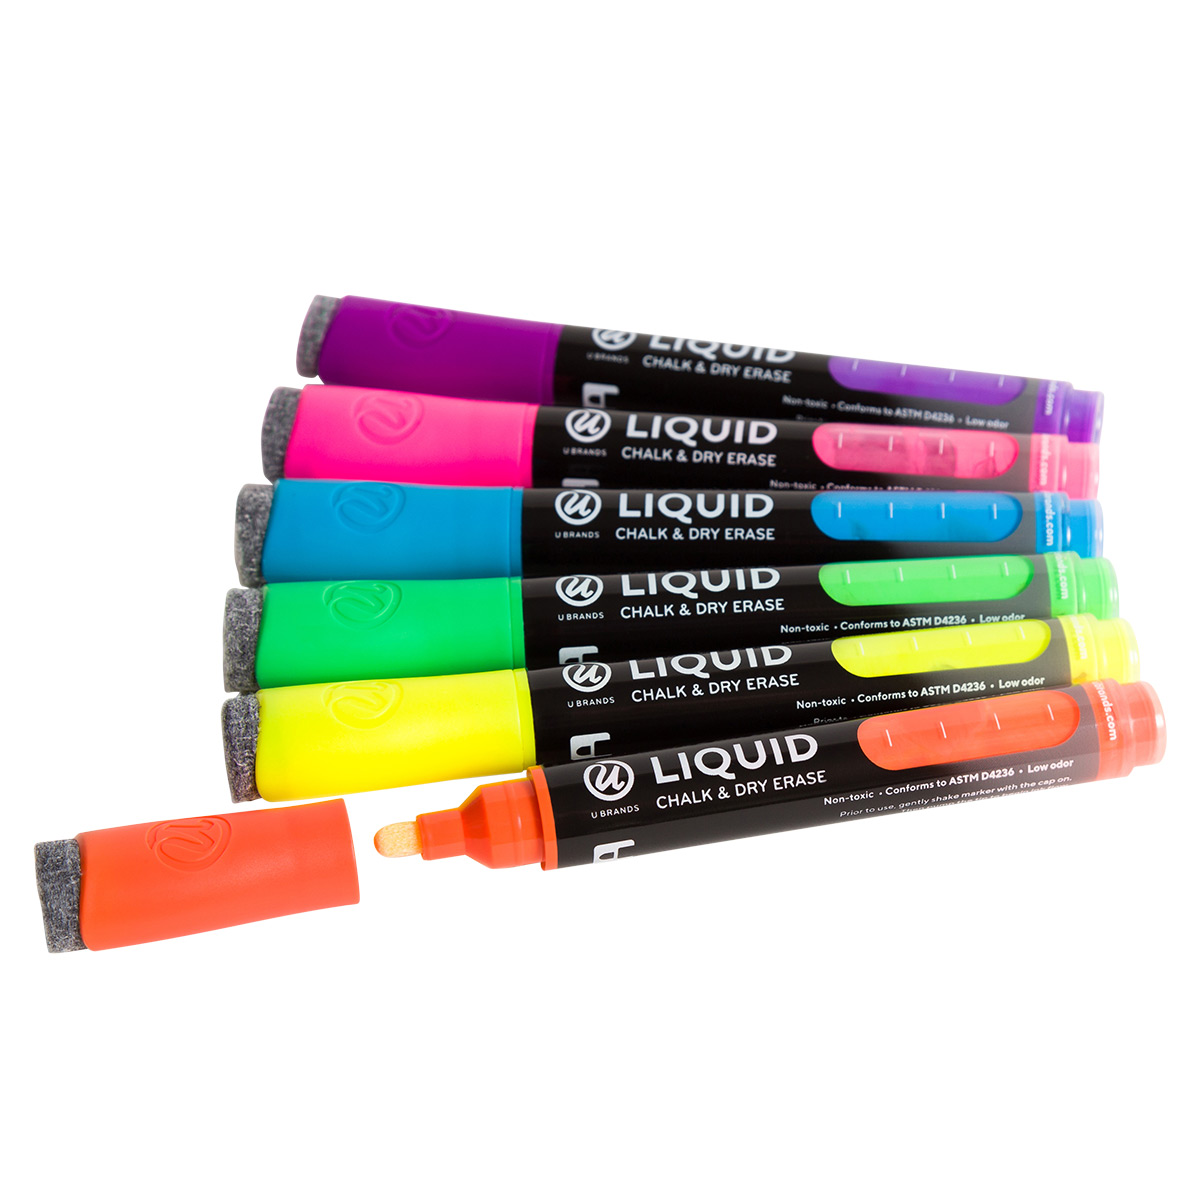 U-Brands Rainbow Liquid Chalk & Dry Erase Markers | The Container Store